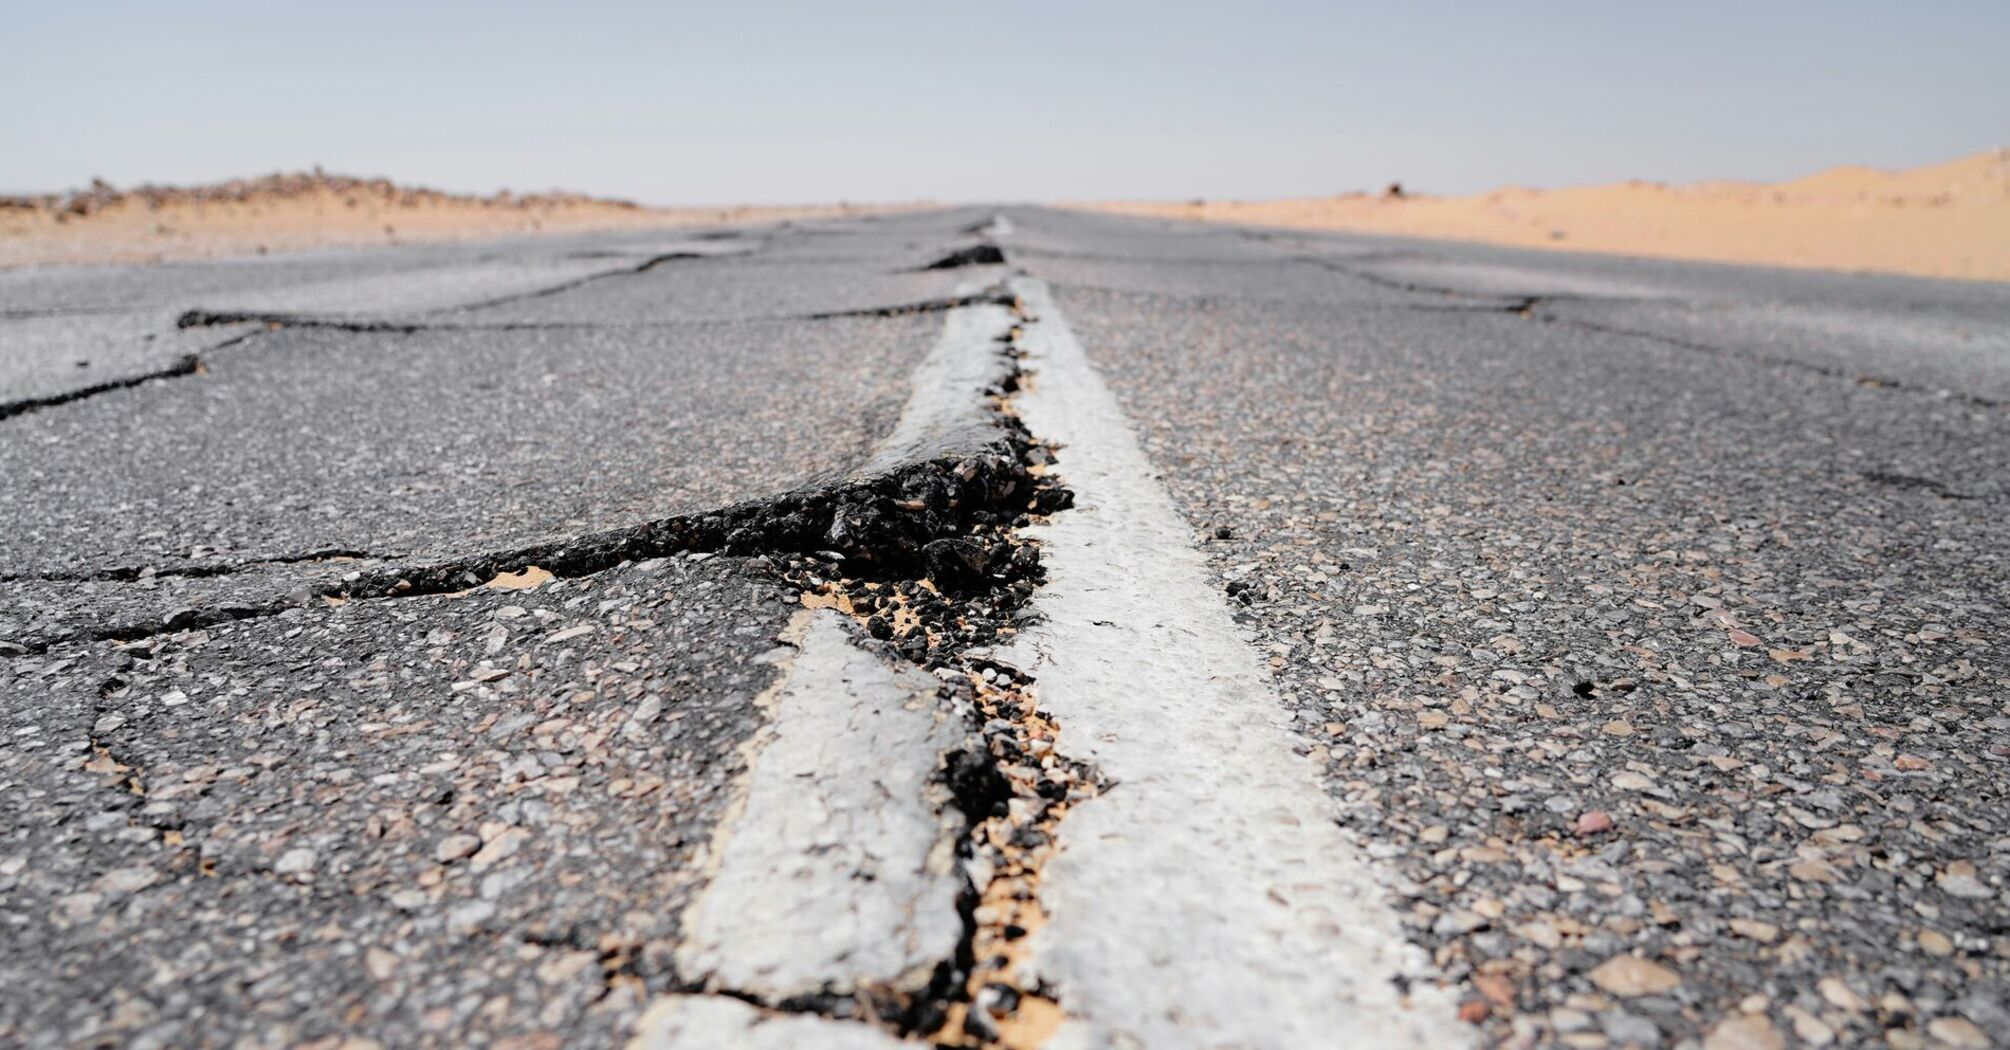 A crack in the middle of a road in the middle of nowhere